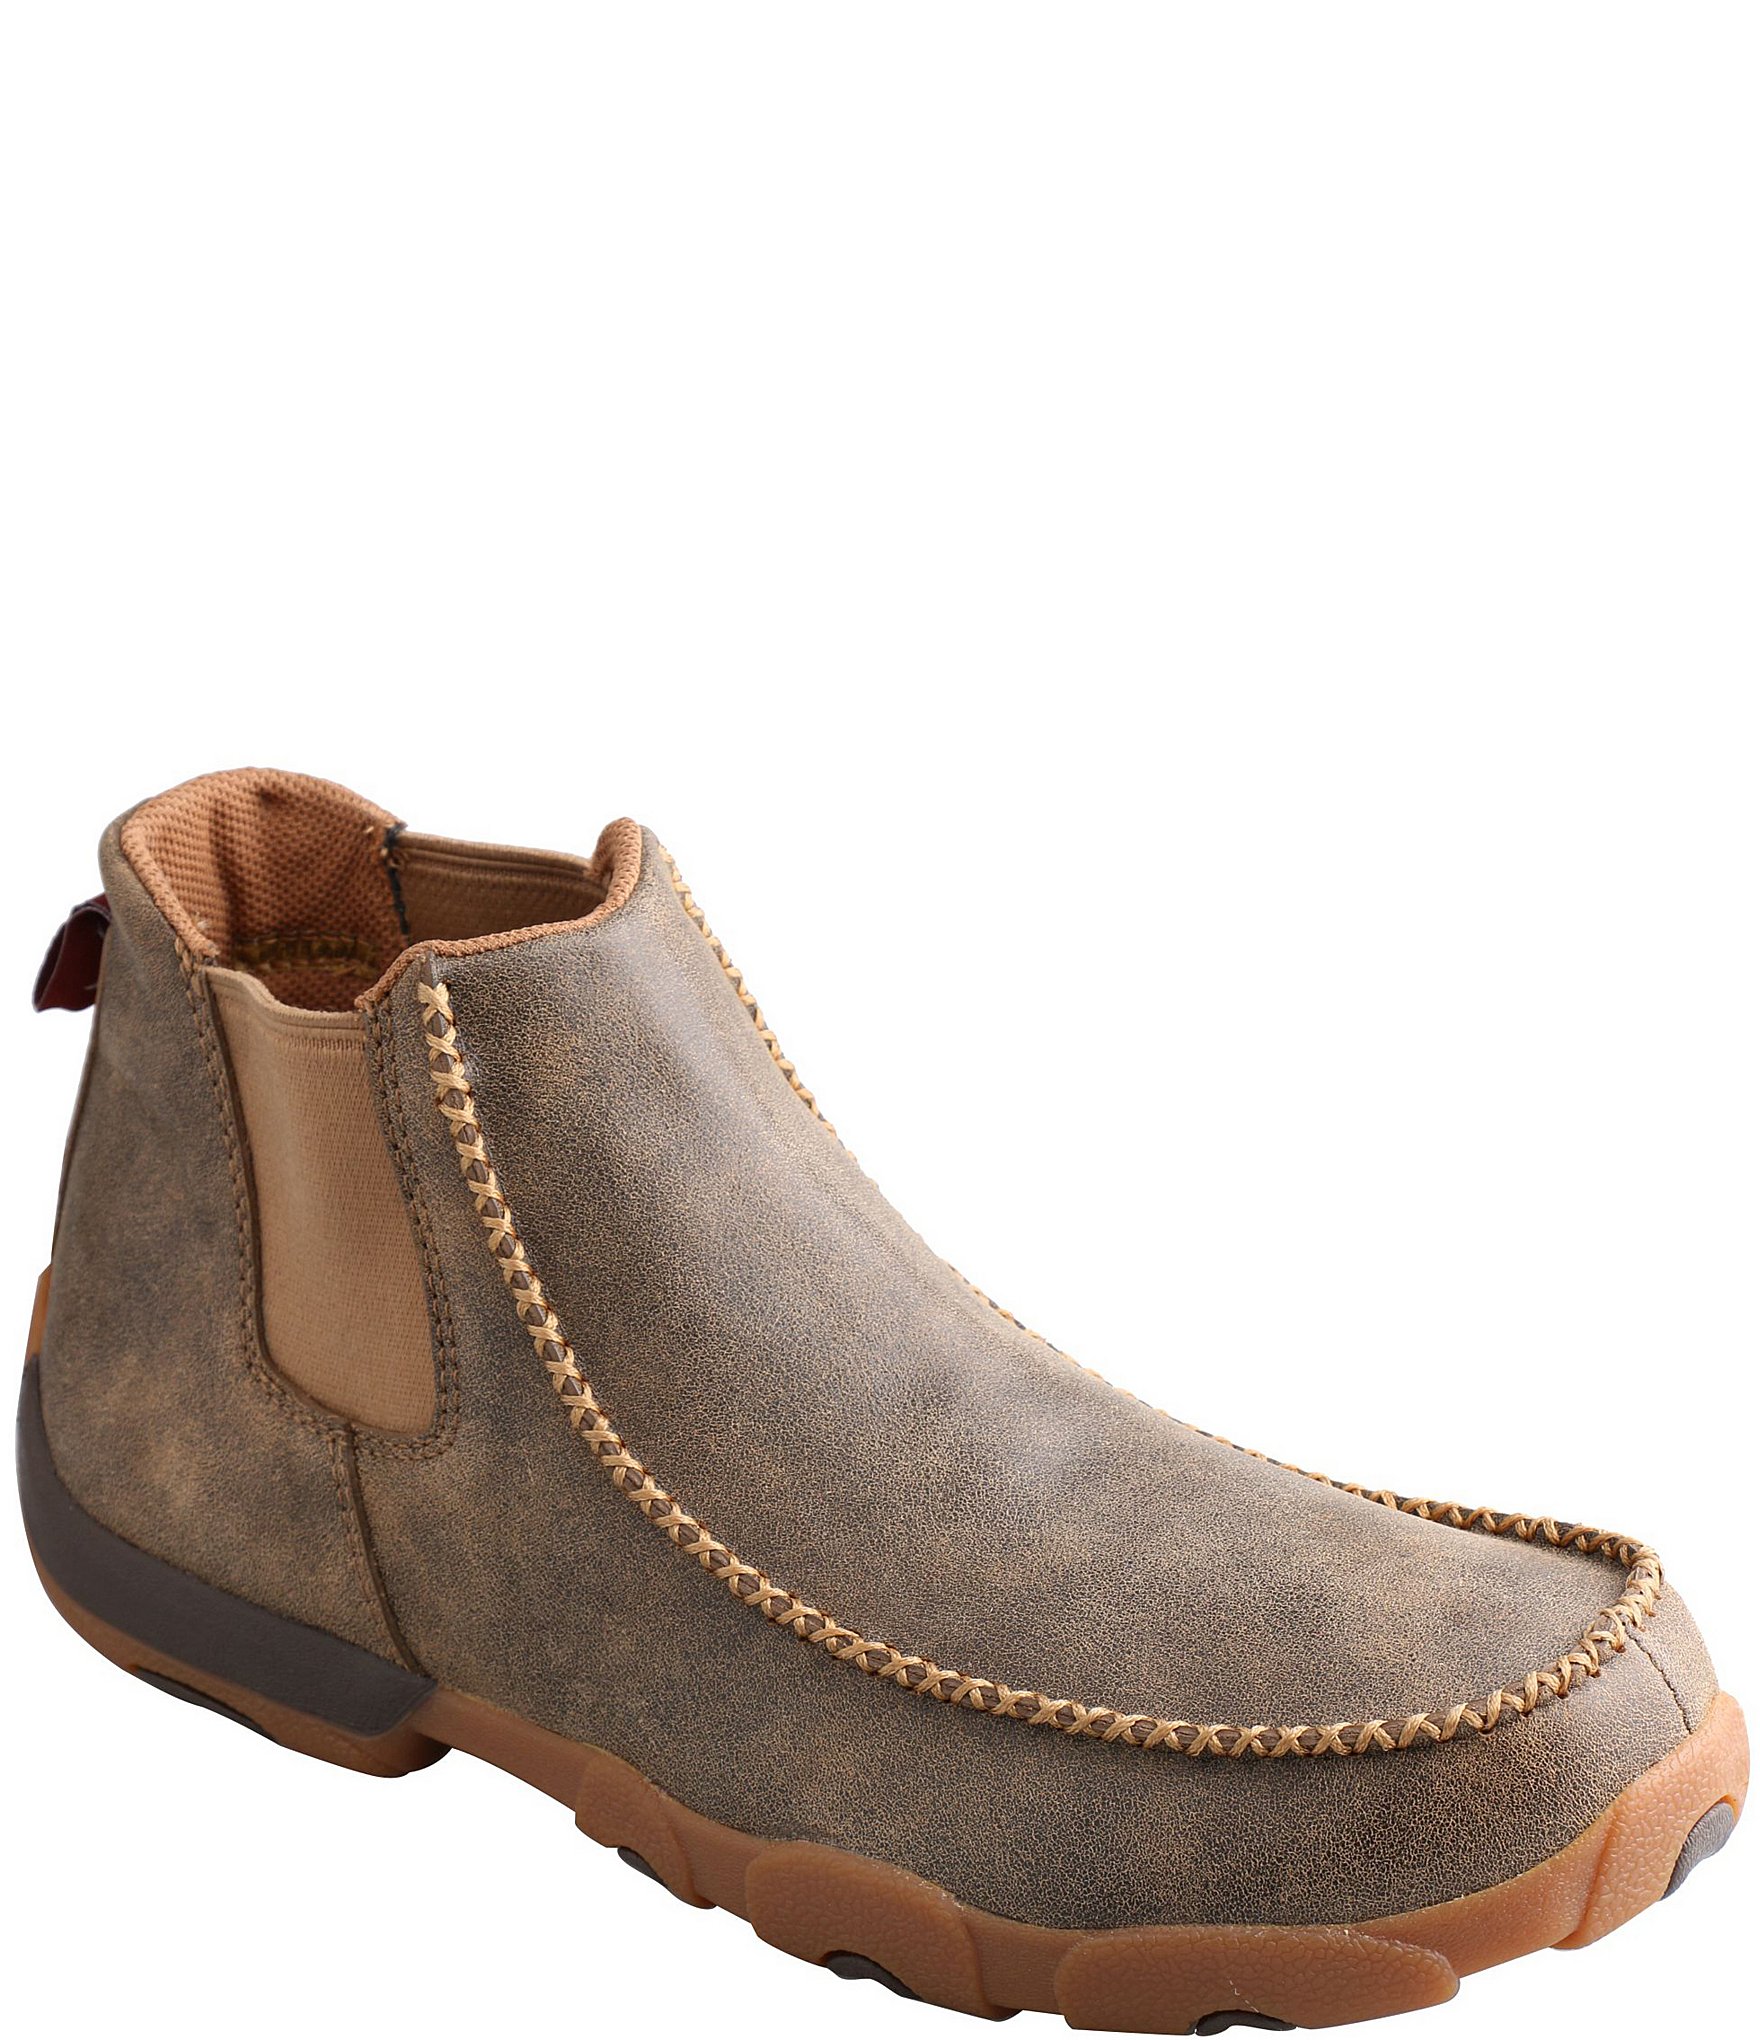 moccasin boots mens leather